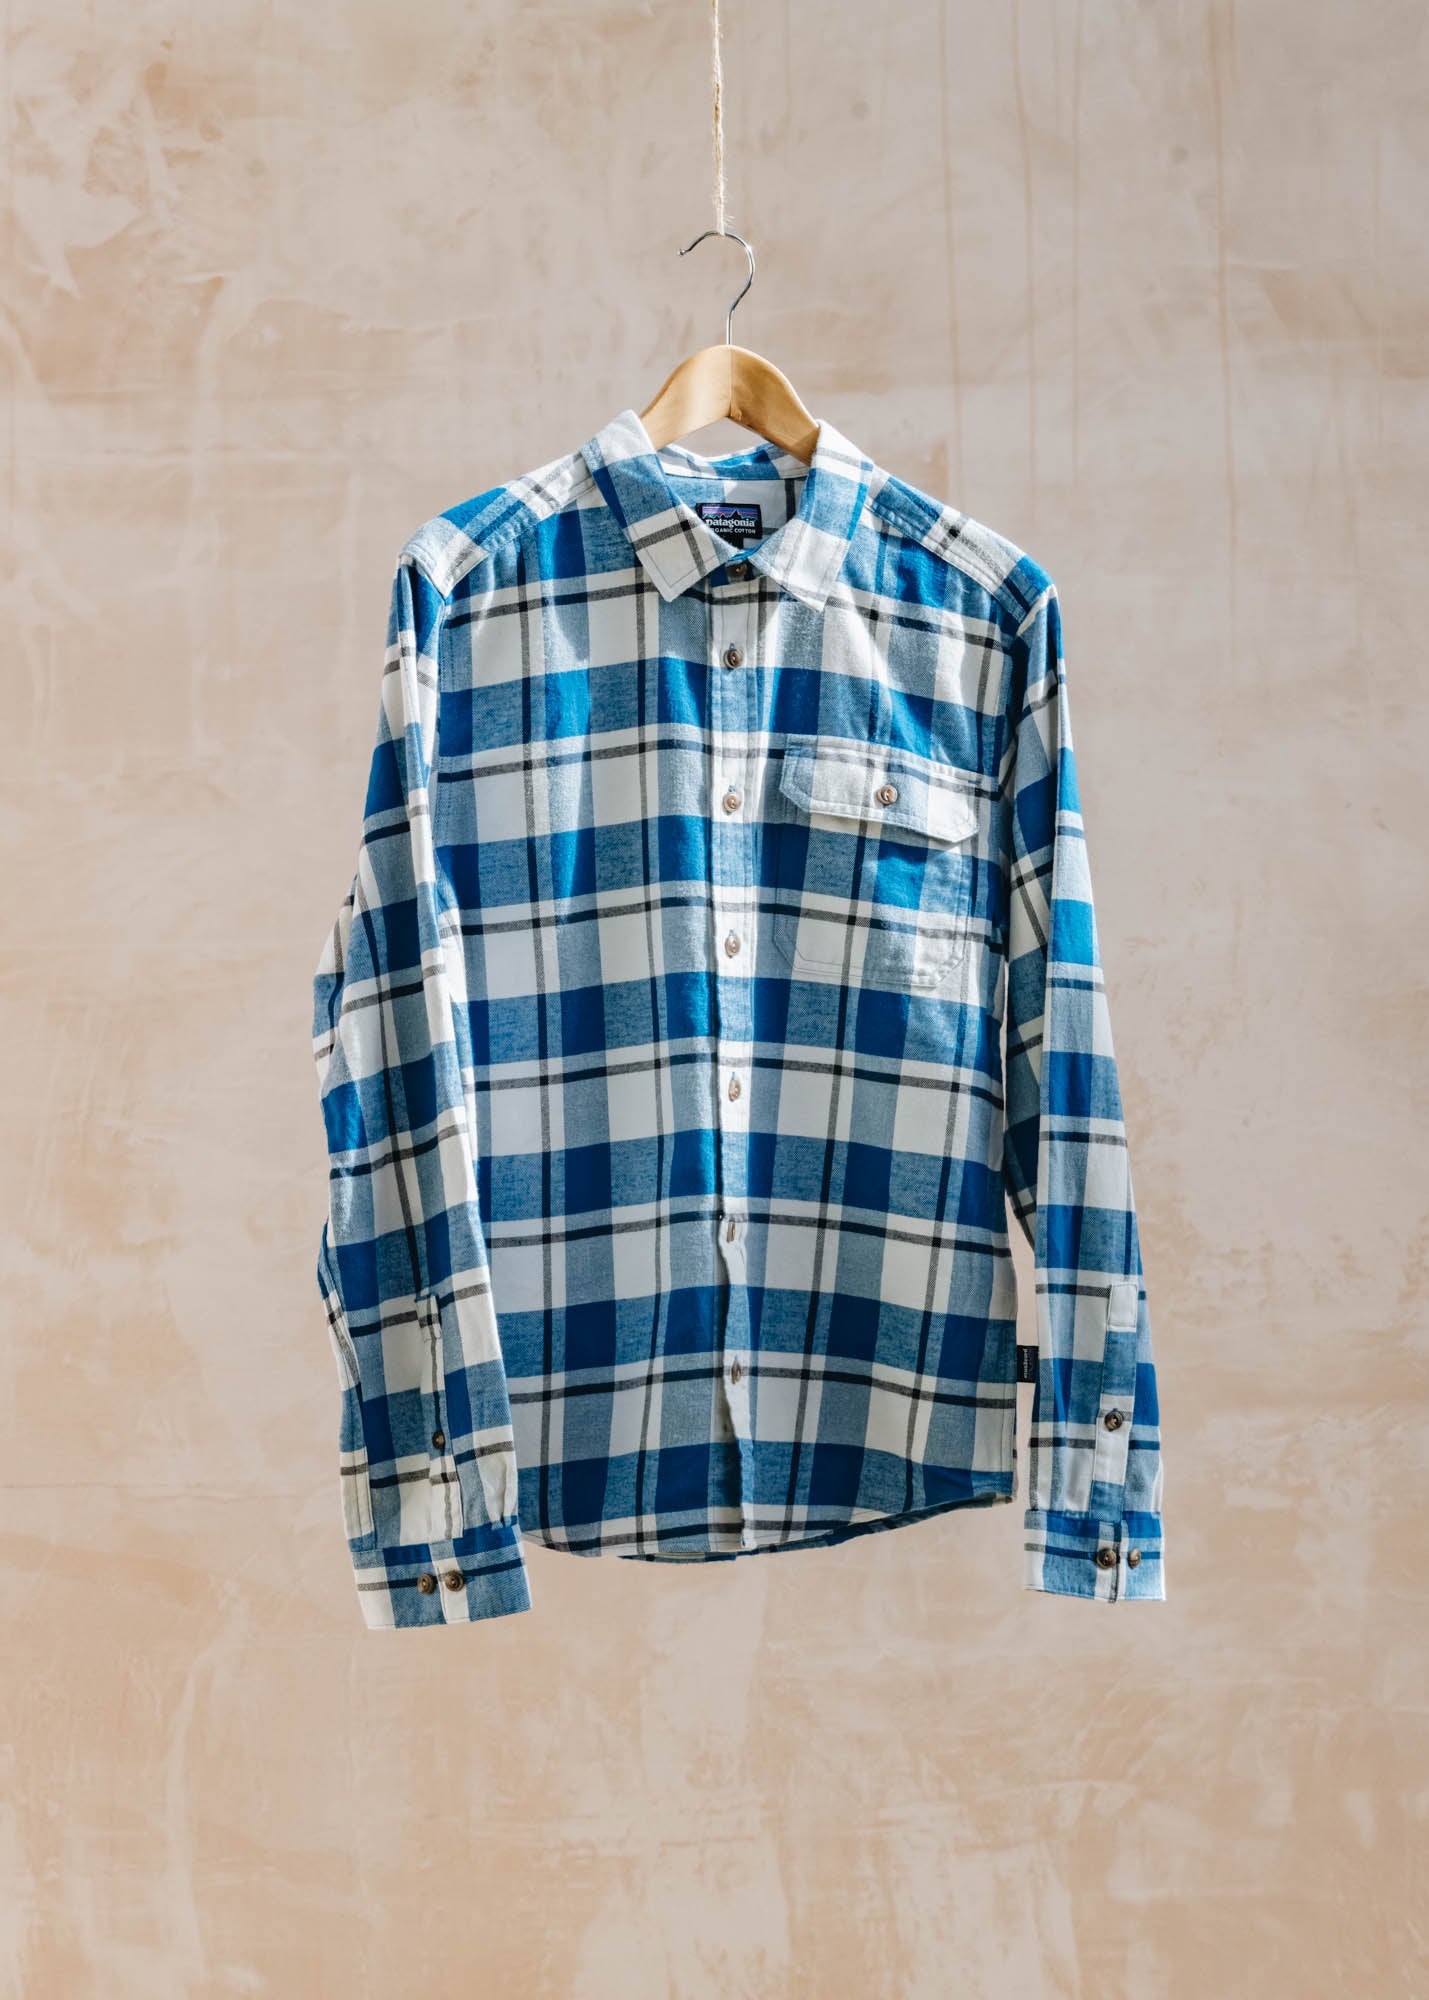 Patagonia Fjord Flannel Shirt in Captain